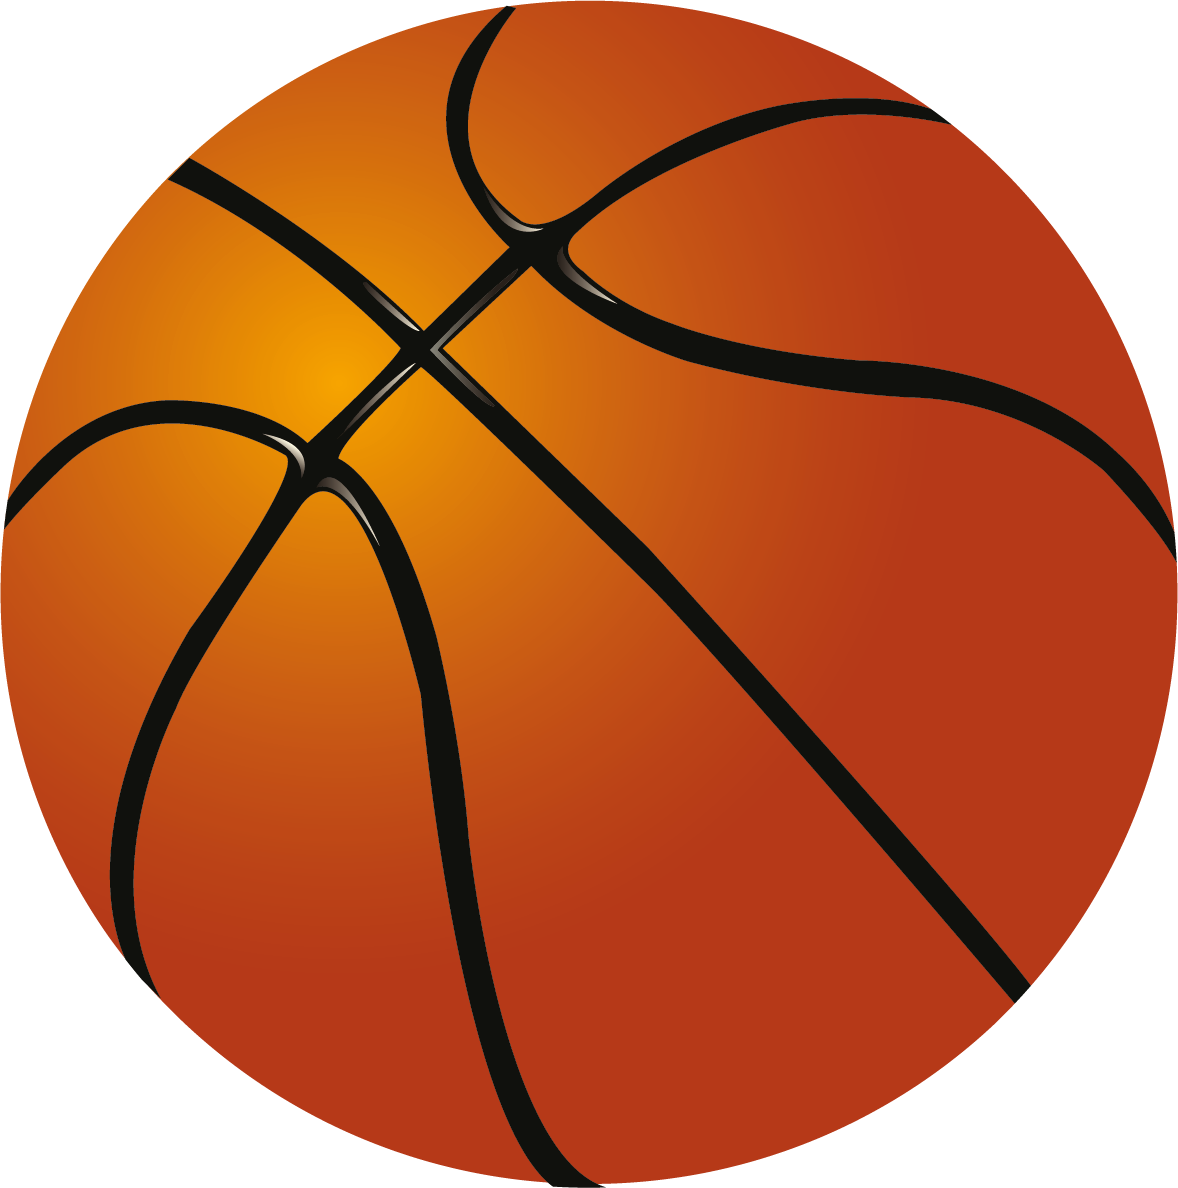 Basketball Hoop Clipart Black And White | Clipart library - Free 